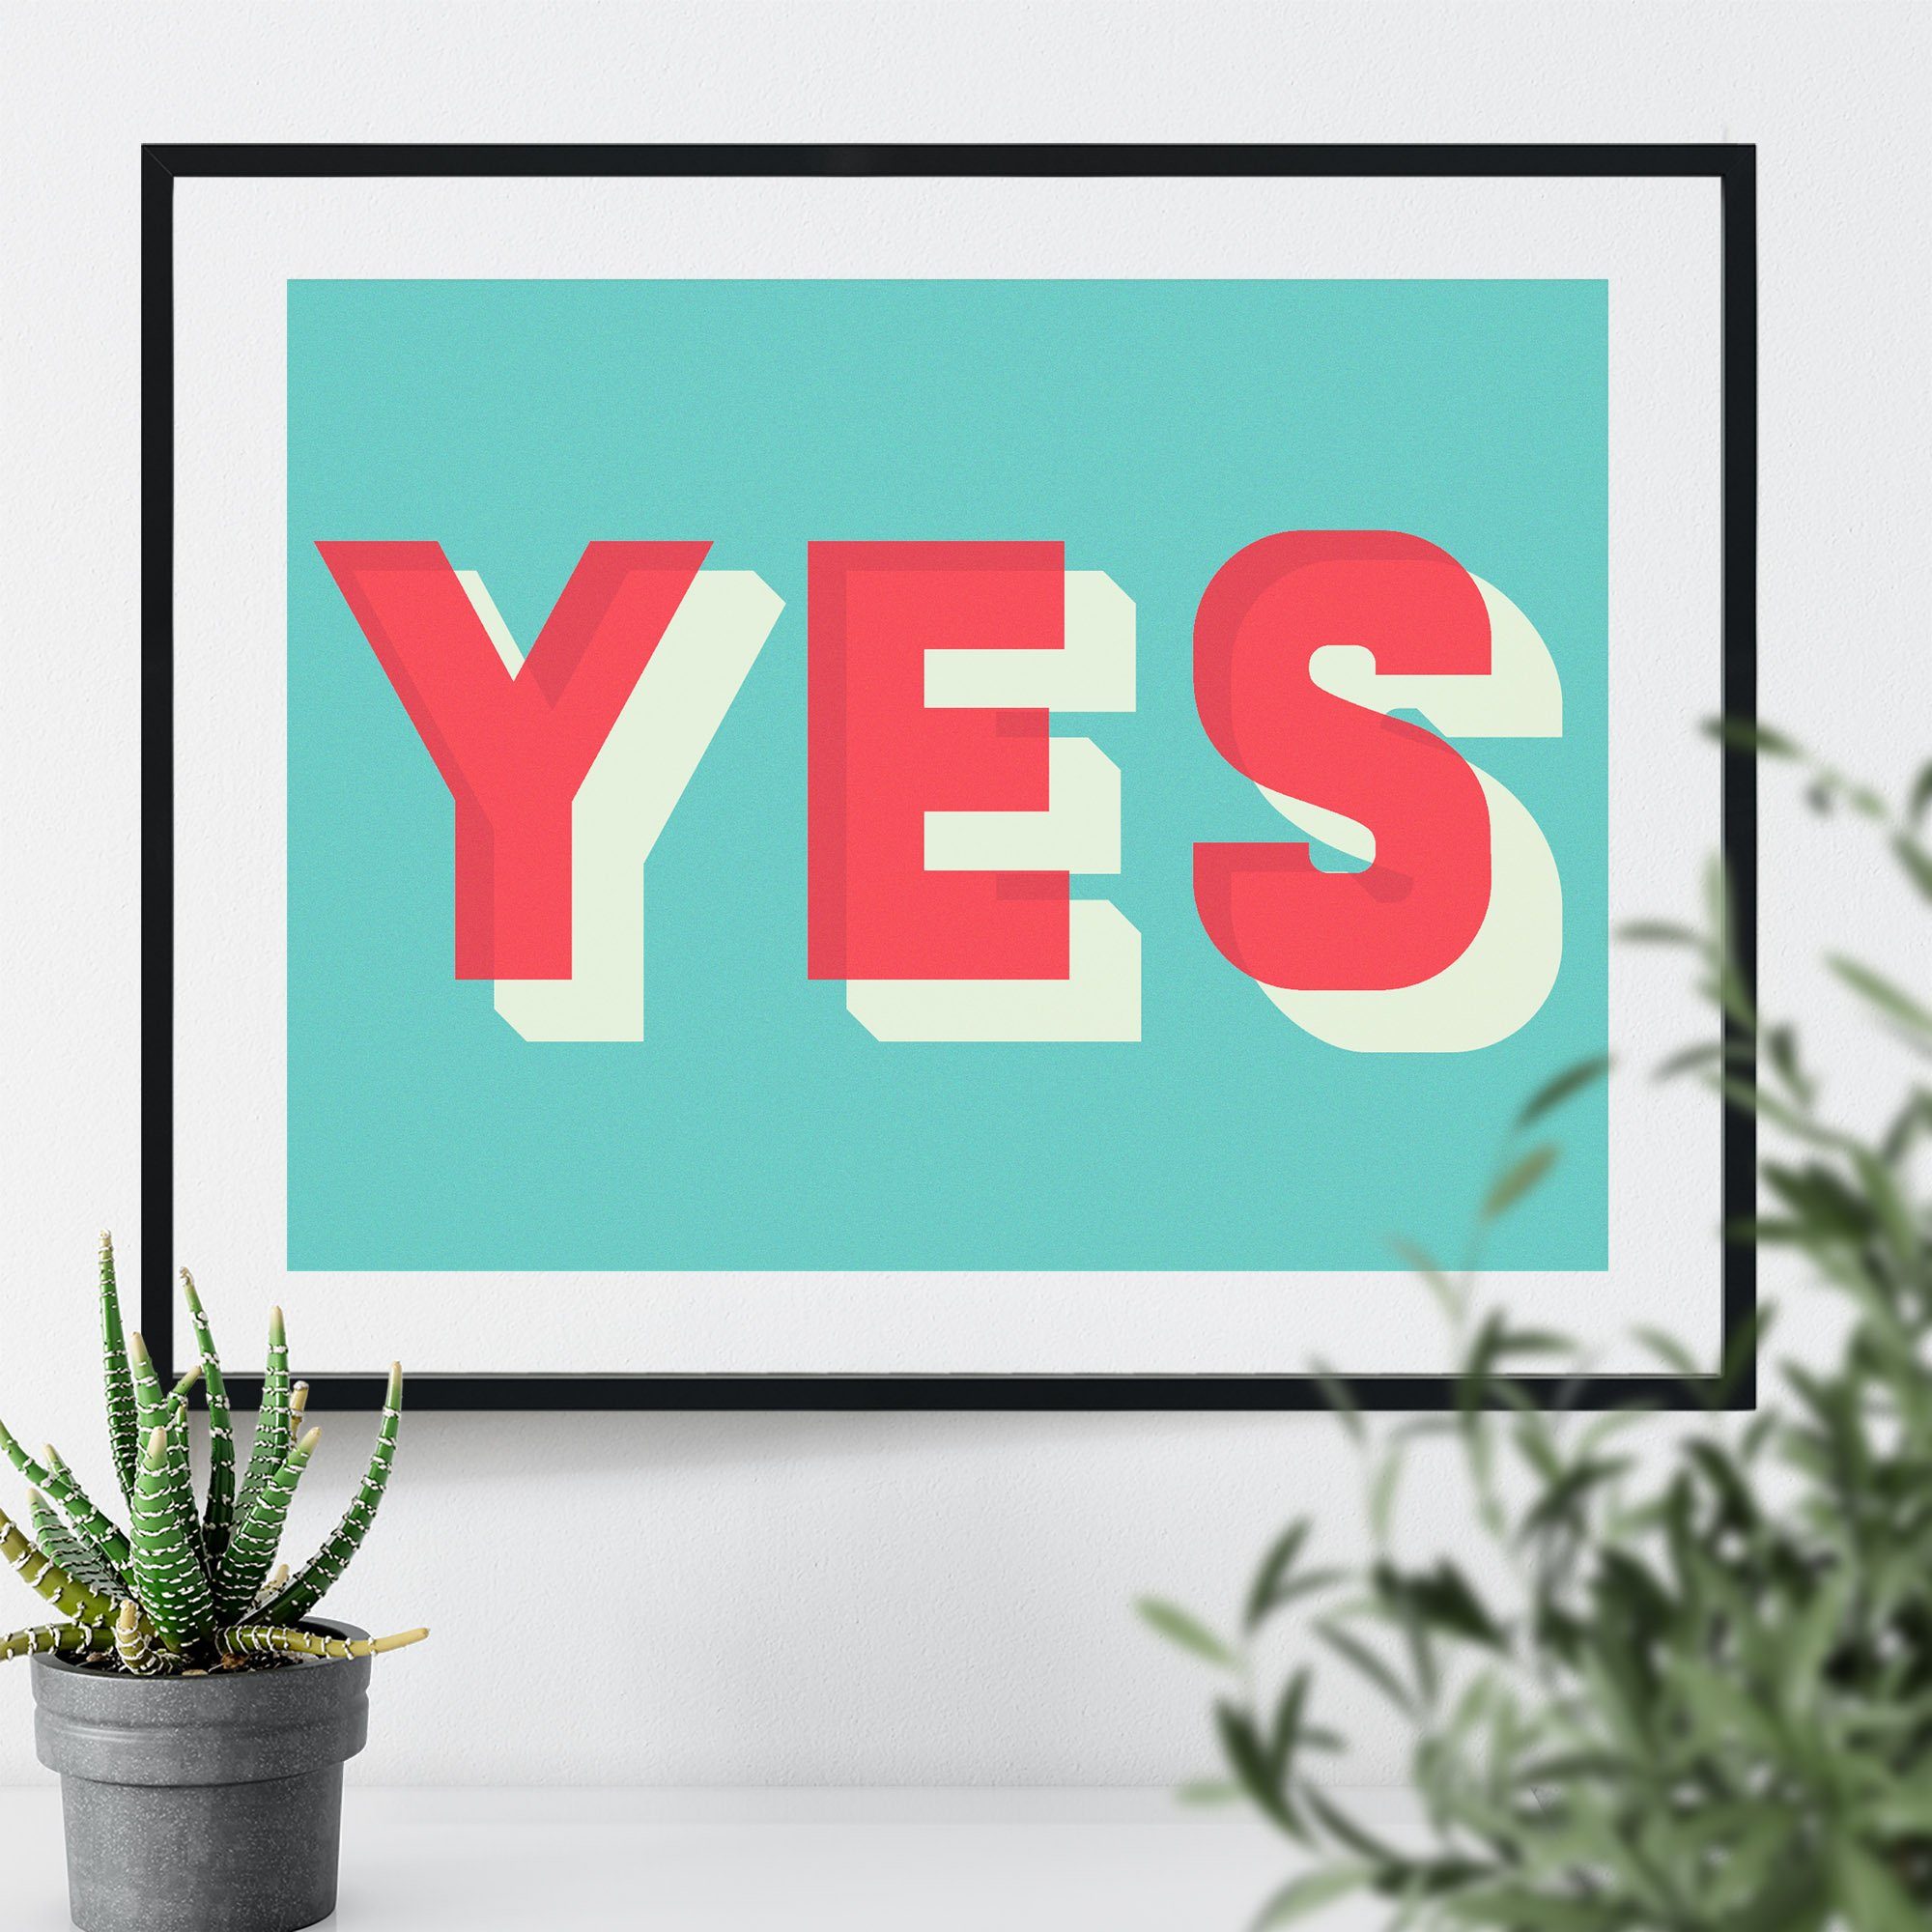 Large framed print of the word YES